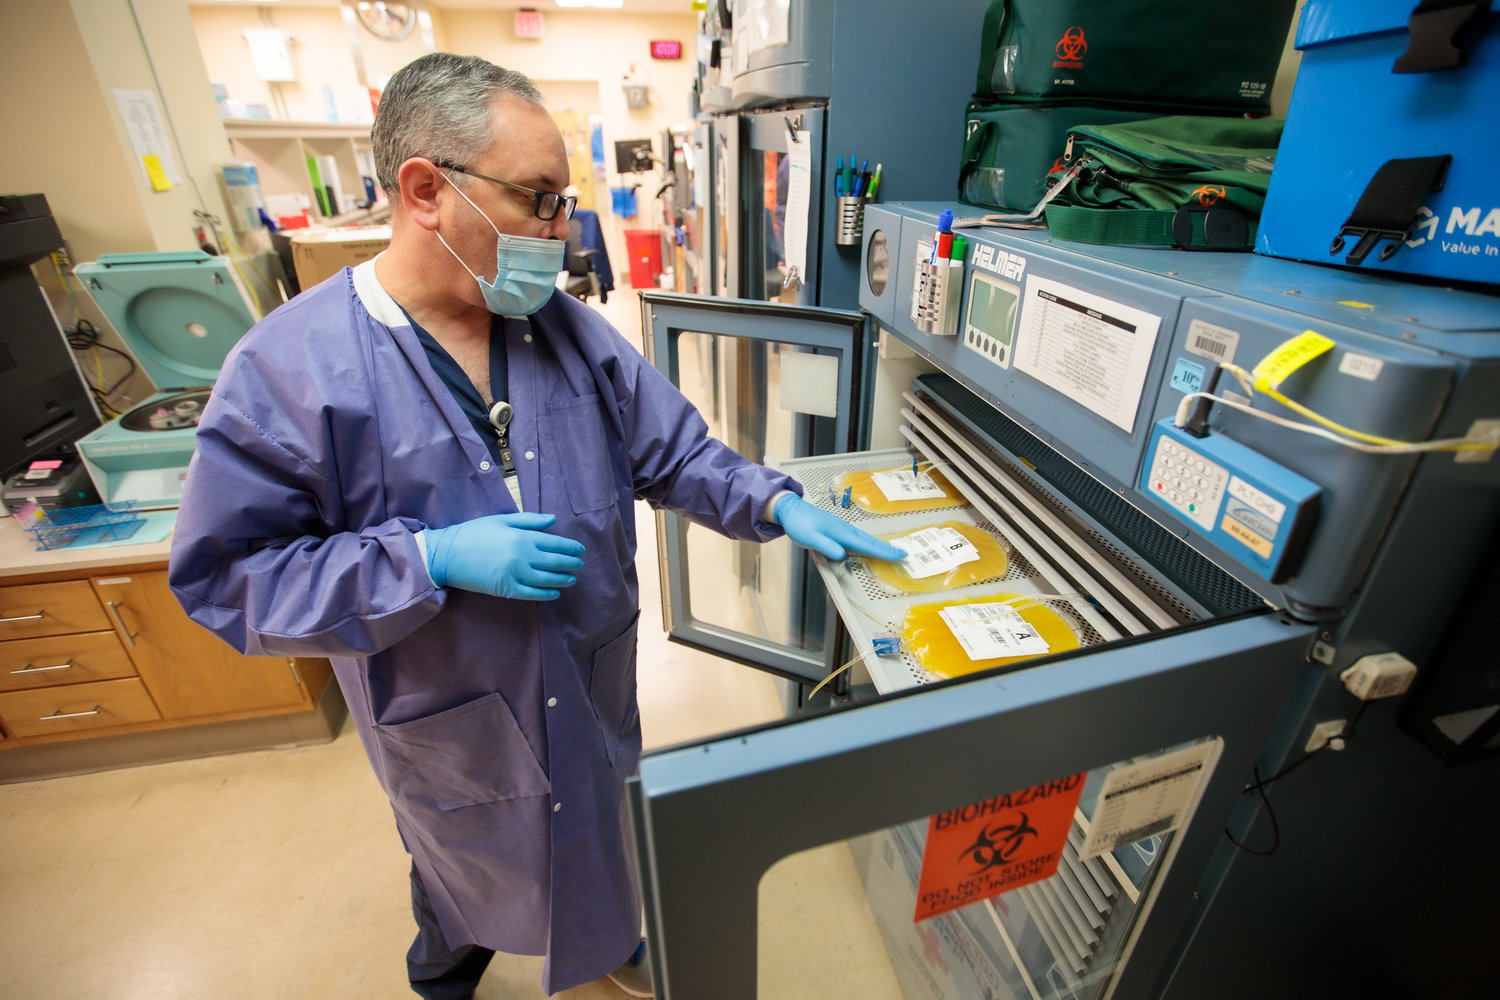 Vince Morton, a medical technologist who lives in Madison, checks the inventory of platelets stored at UMMC's blood bank.